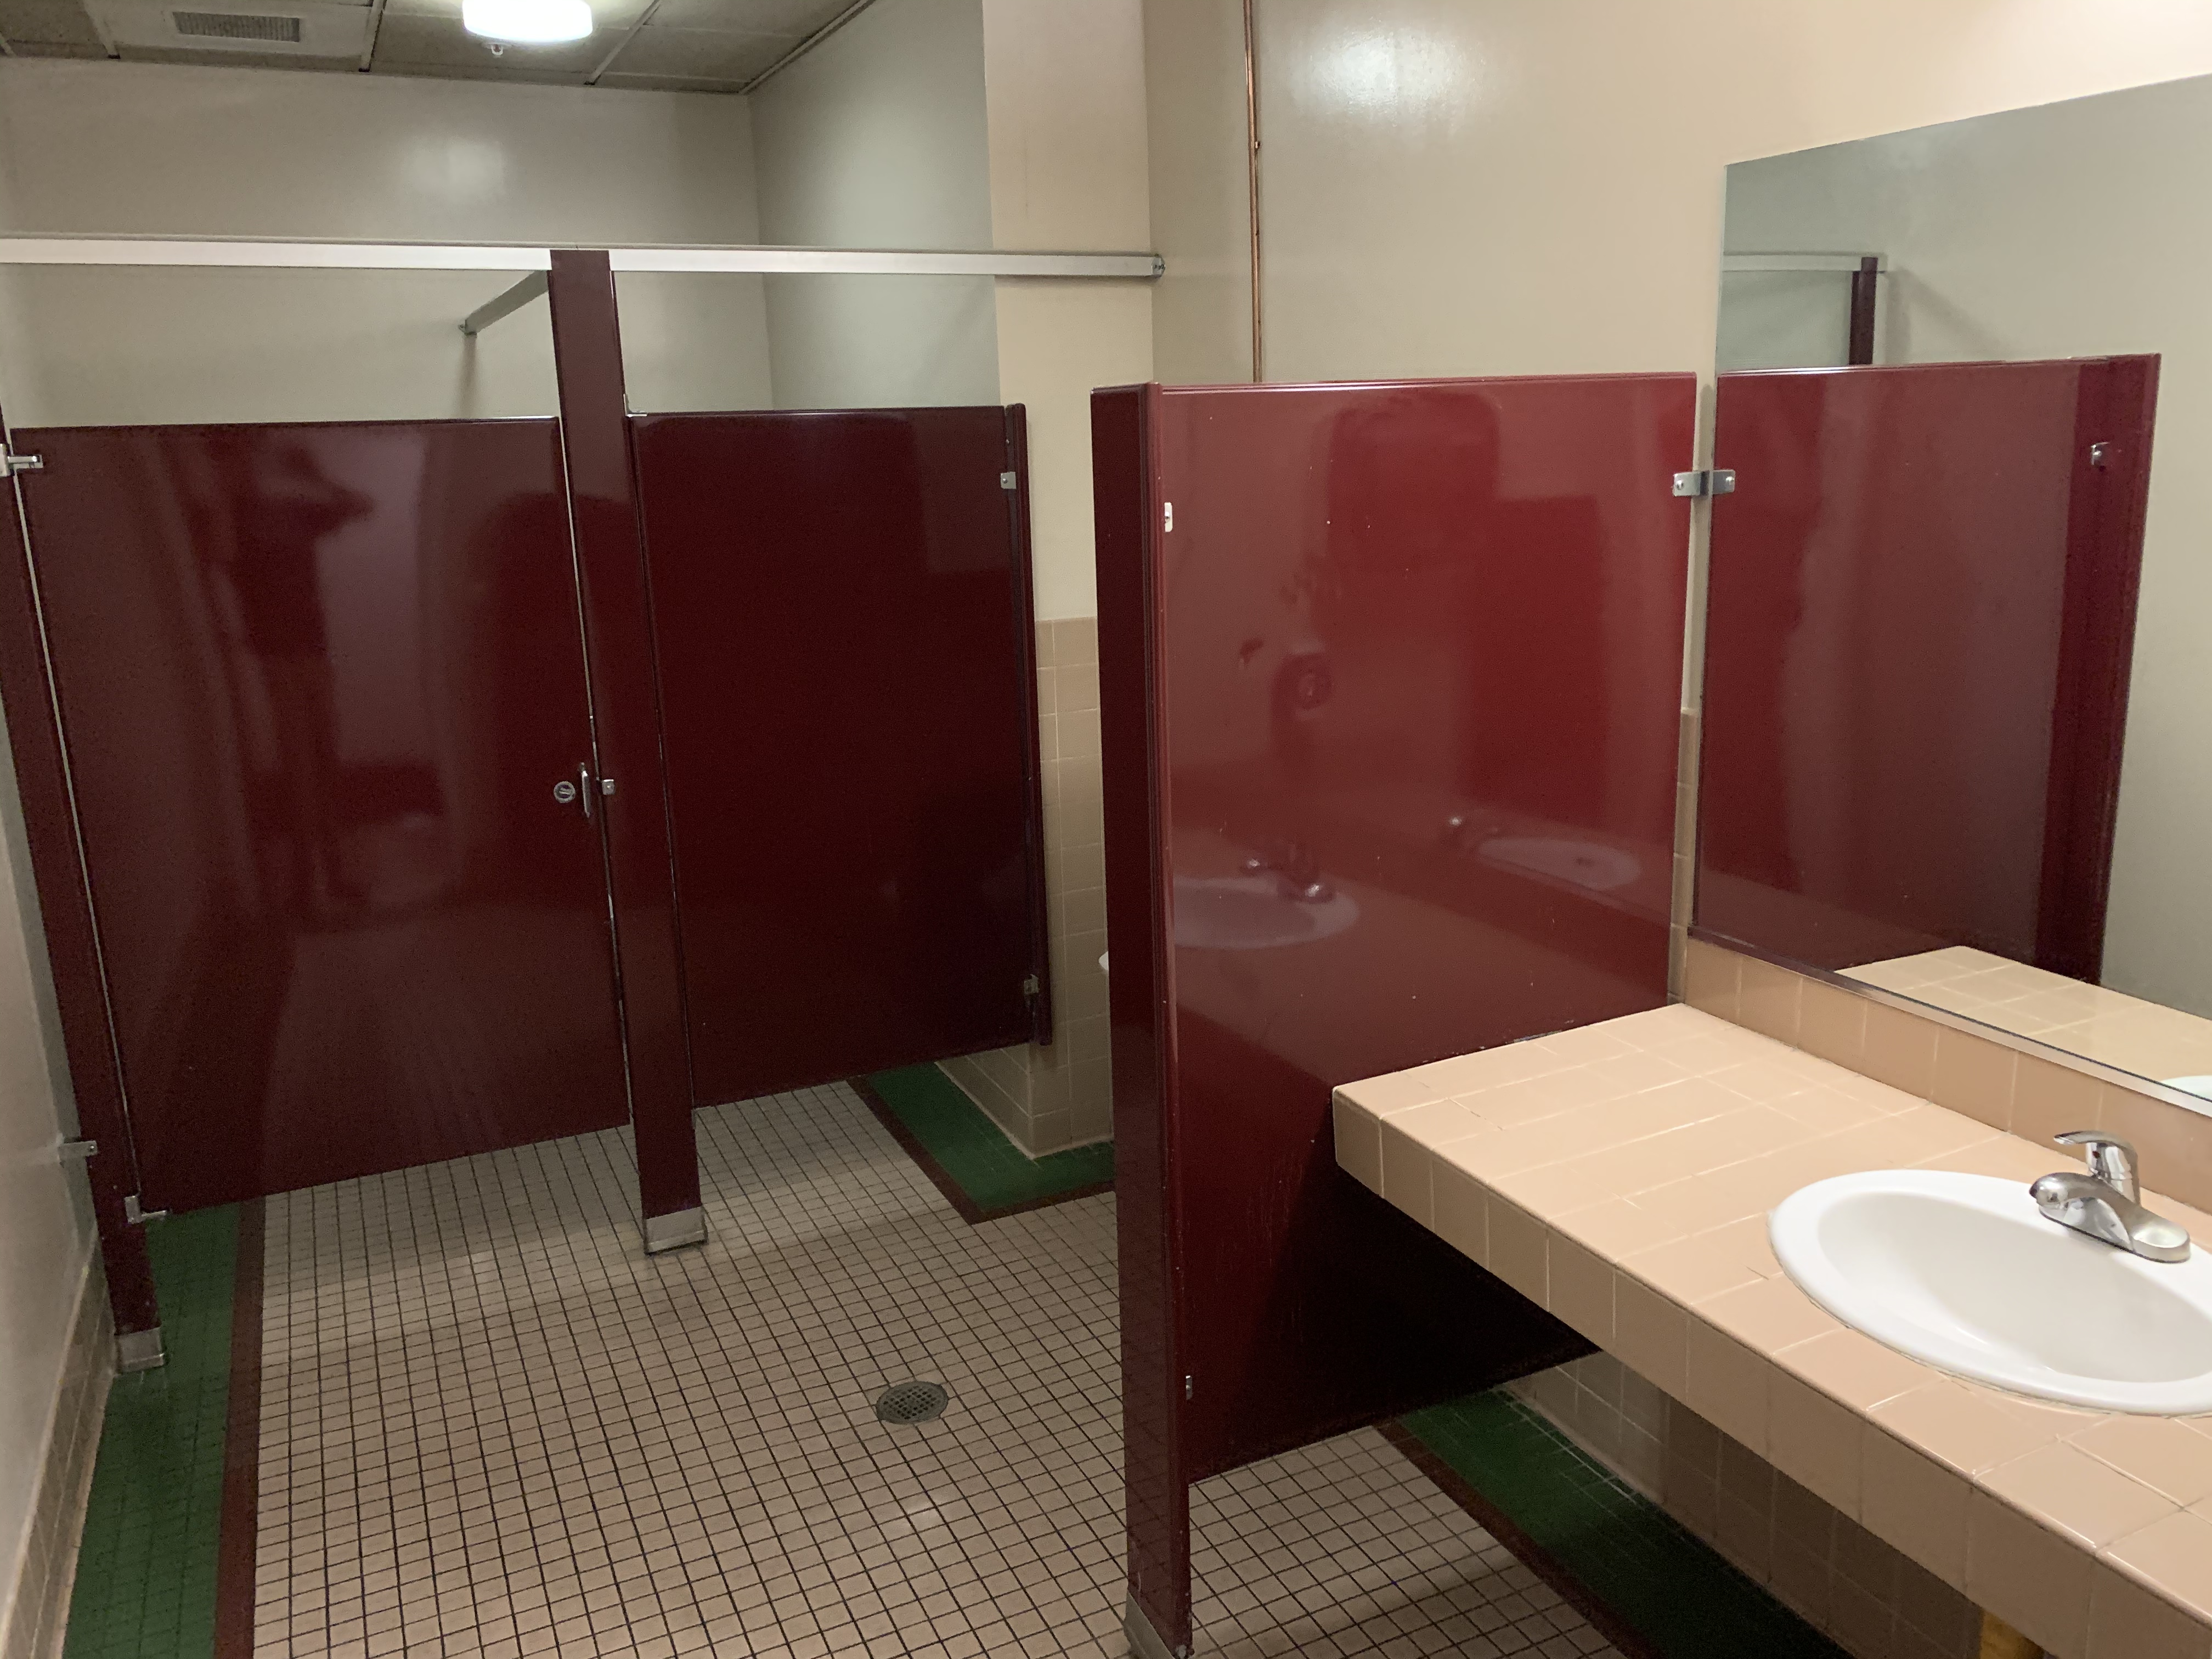 Image of the building bathroom